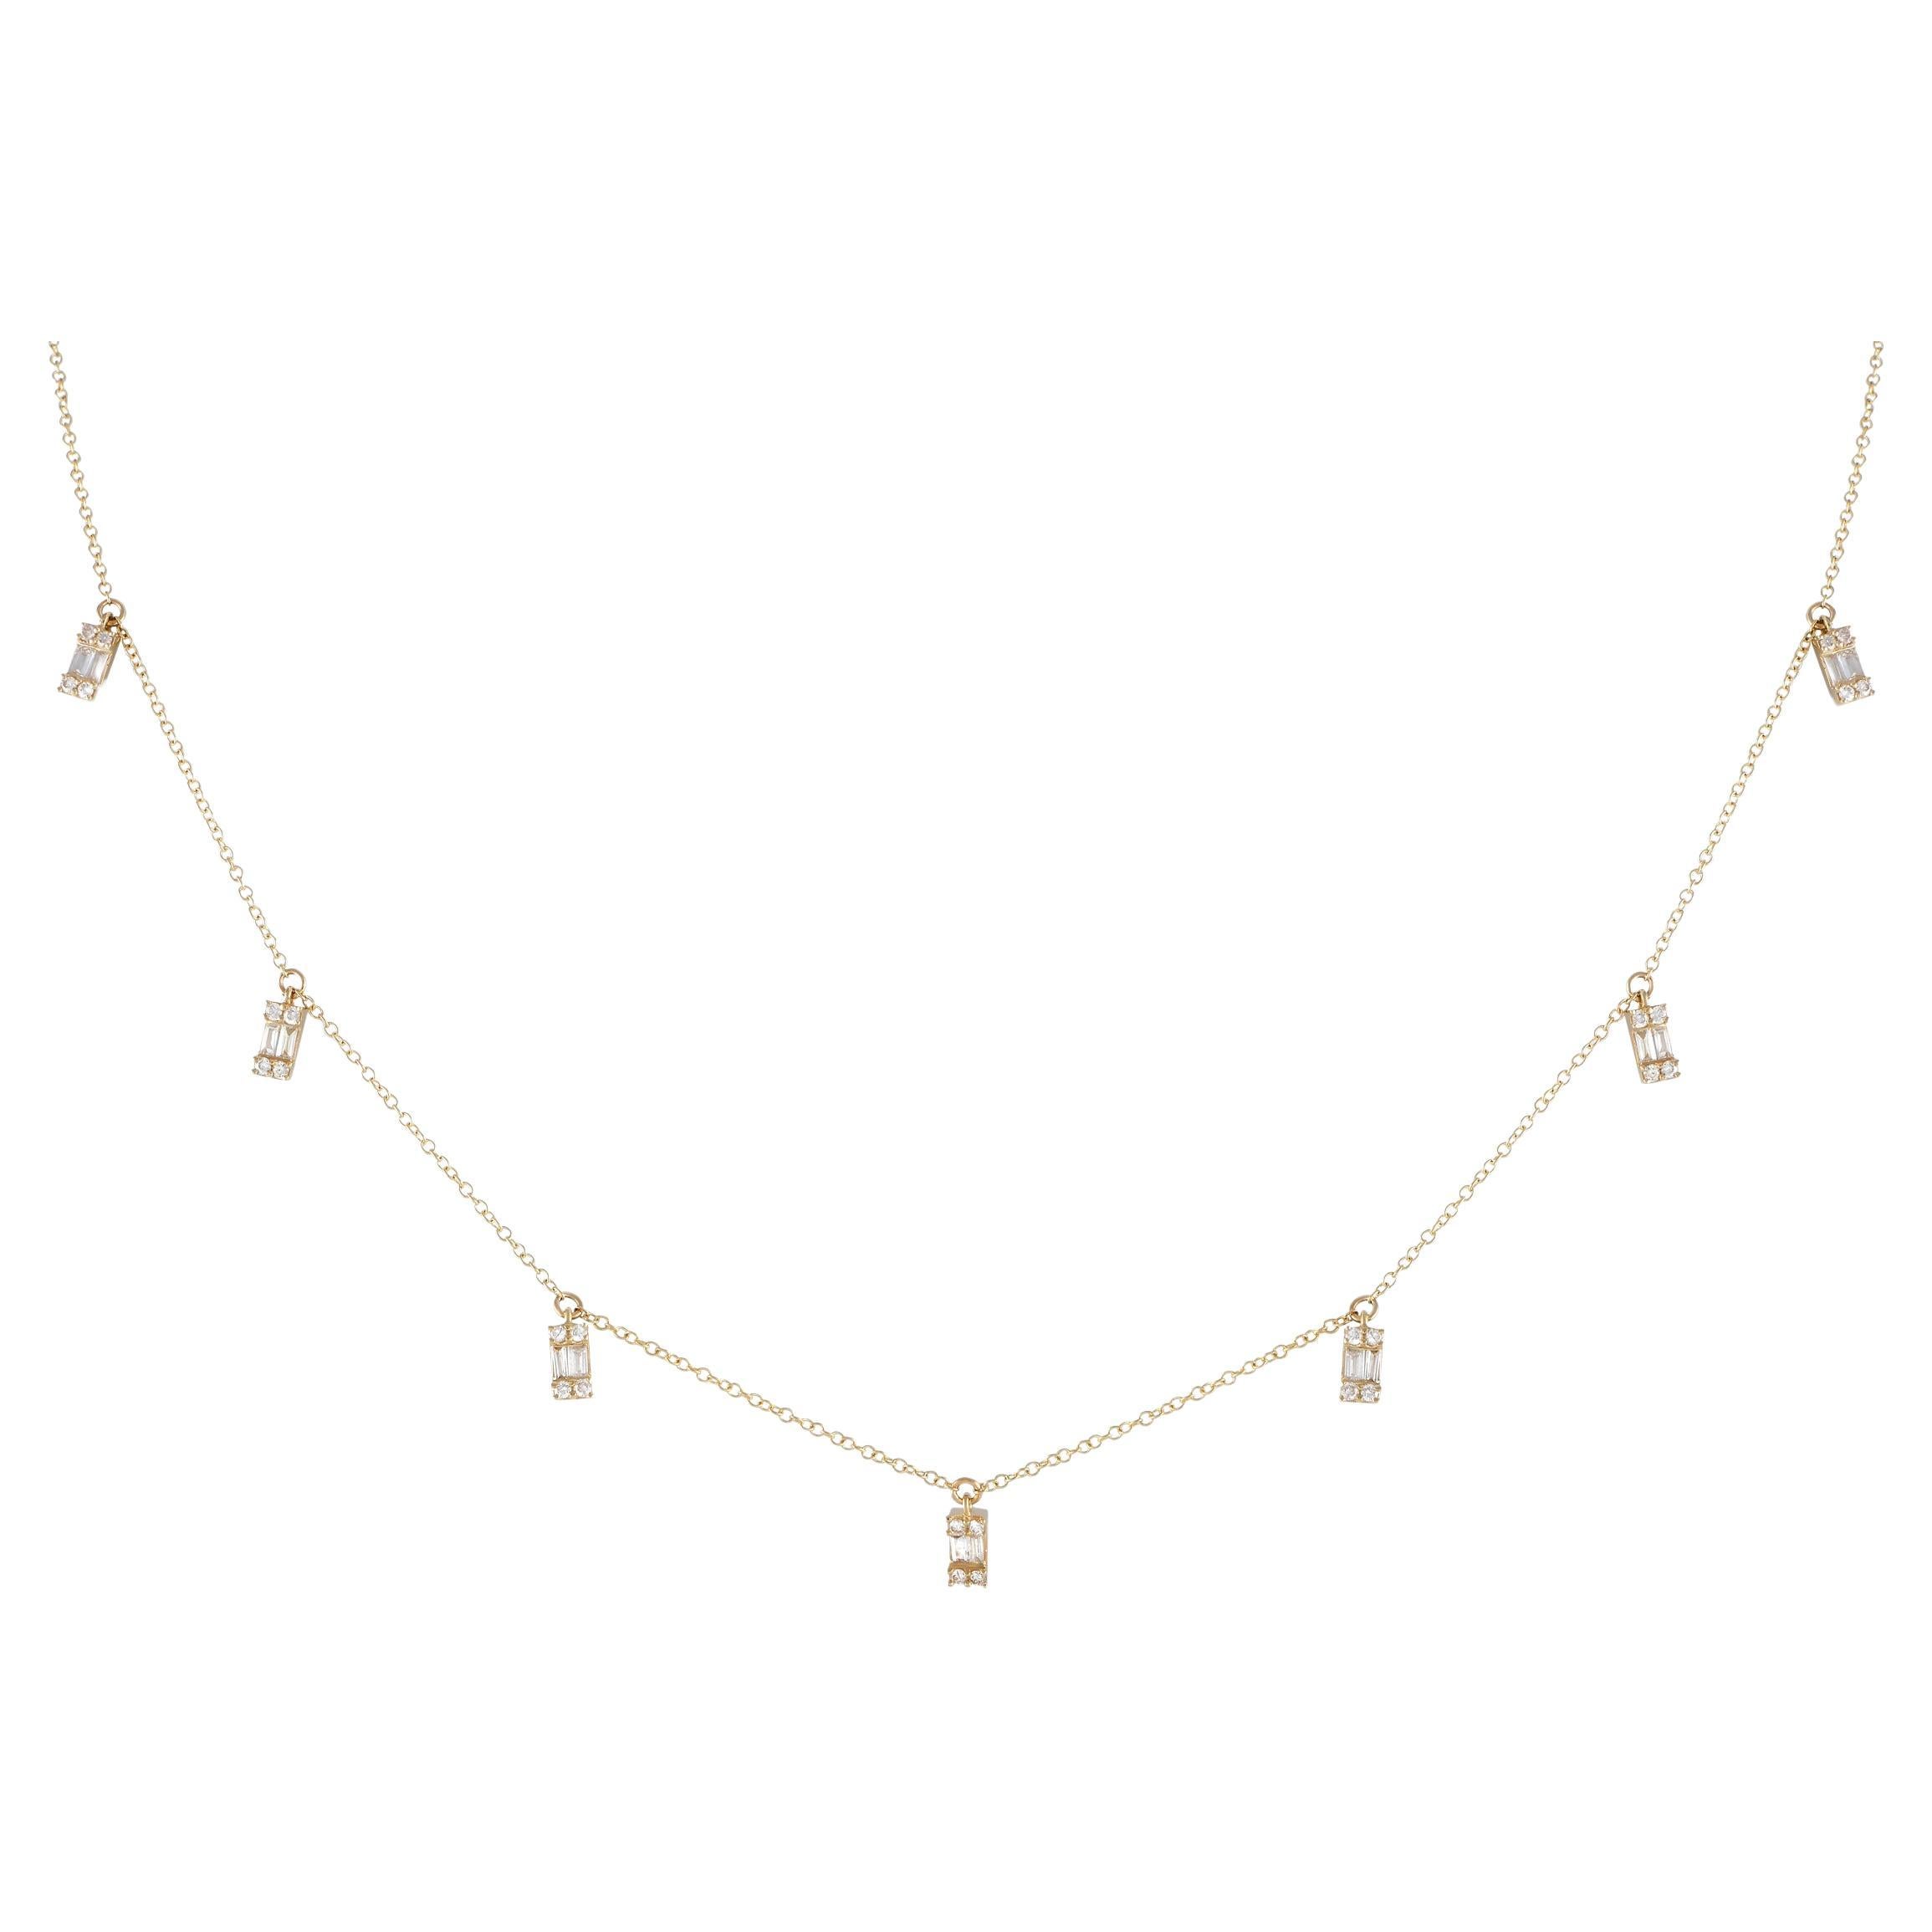 LB Exclusive 14K Yellow Gold 0.33ct Diamond Station Necklace PN14837 For Sale